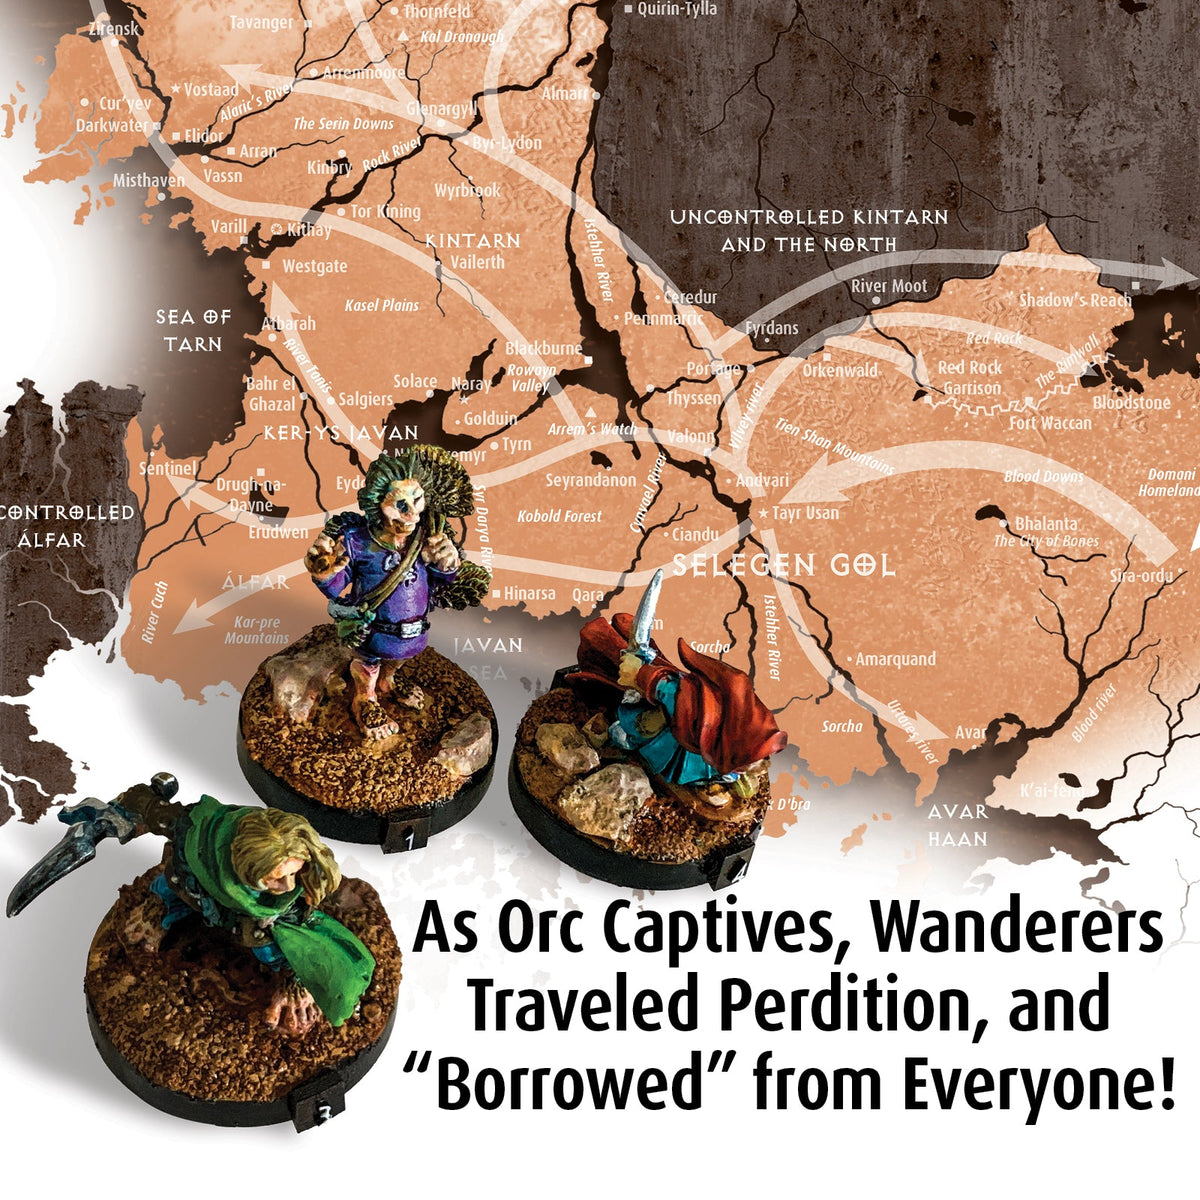 Curse of the Wanderers™ 3e Guide